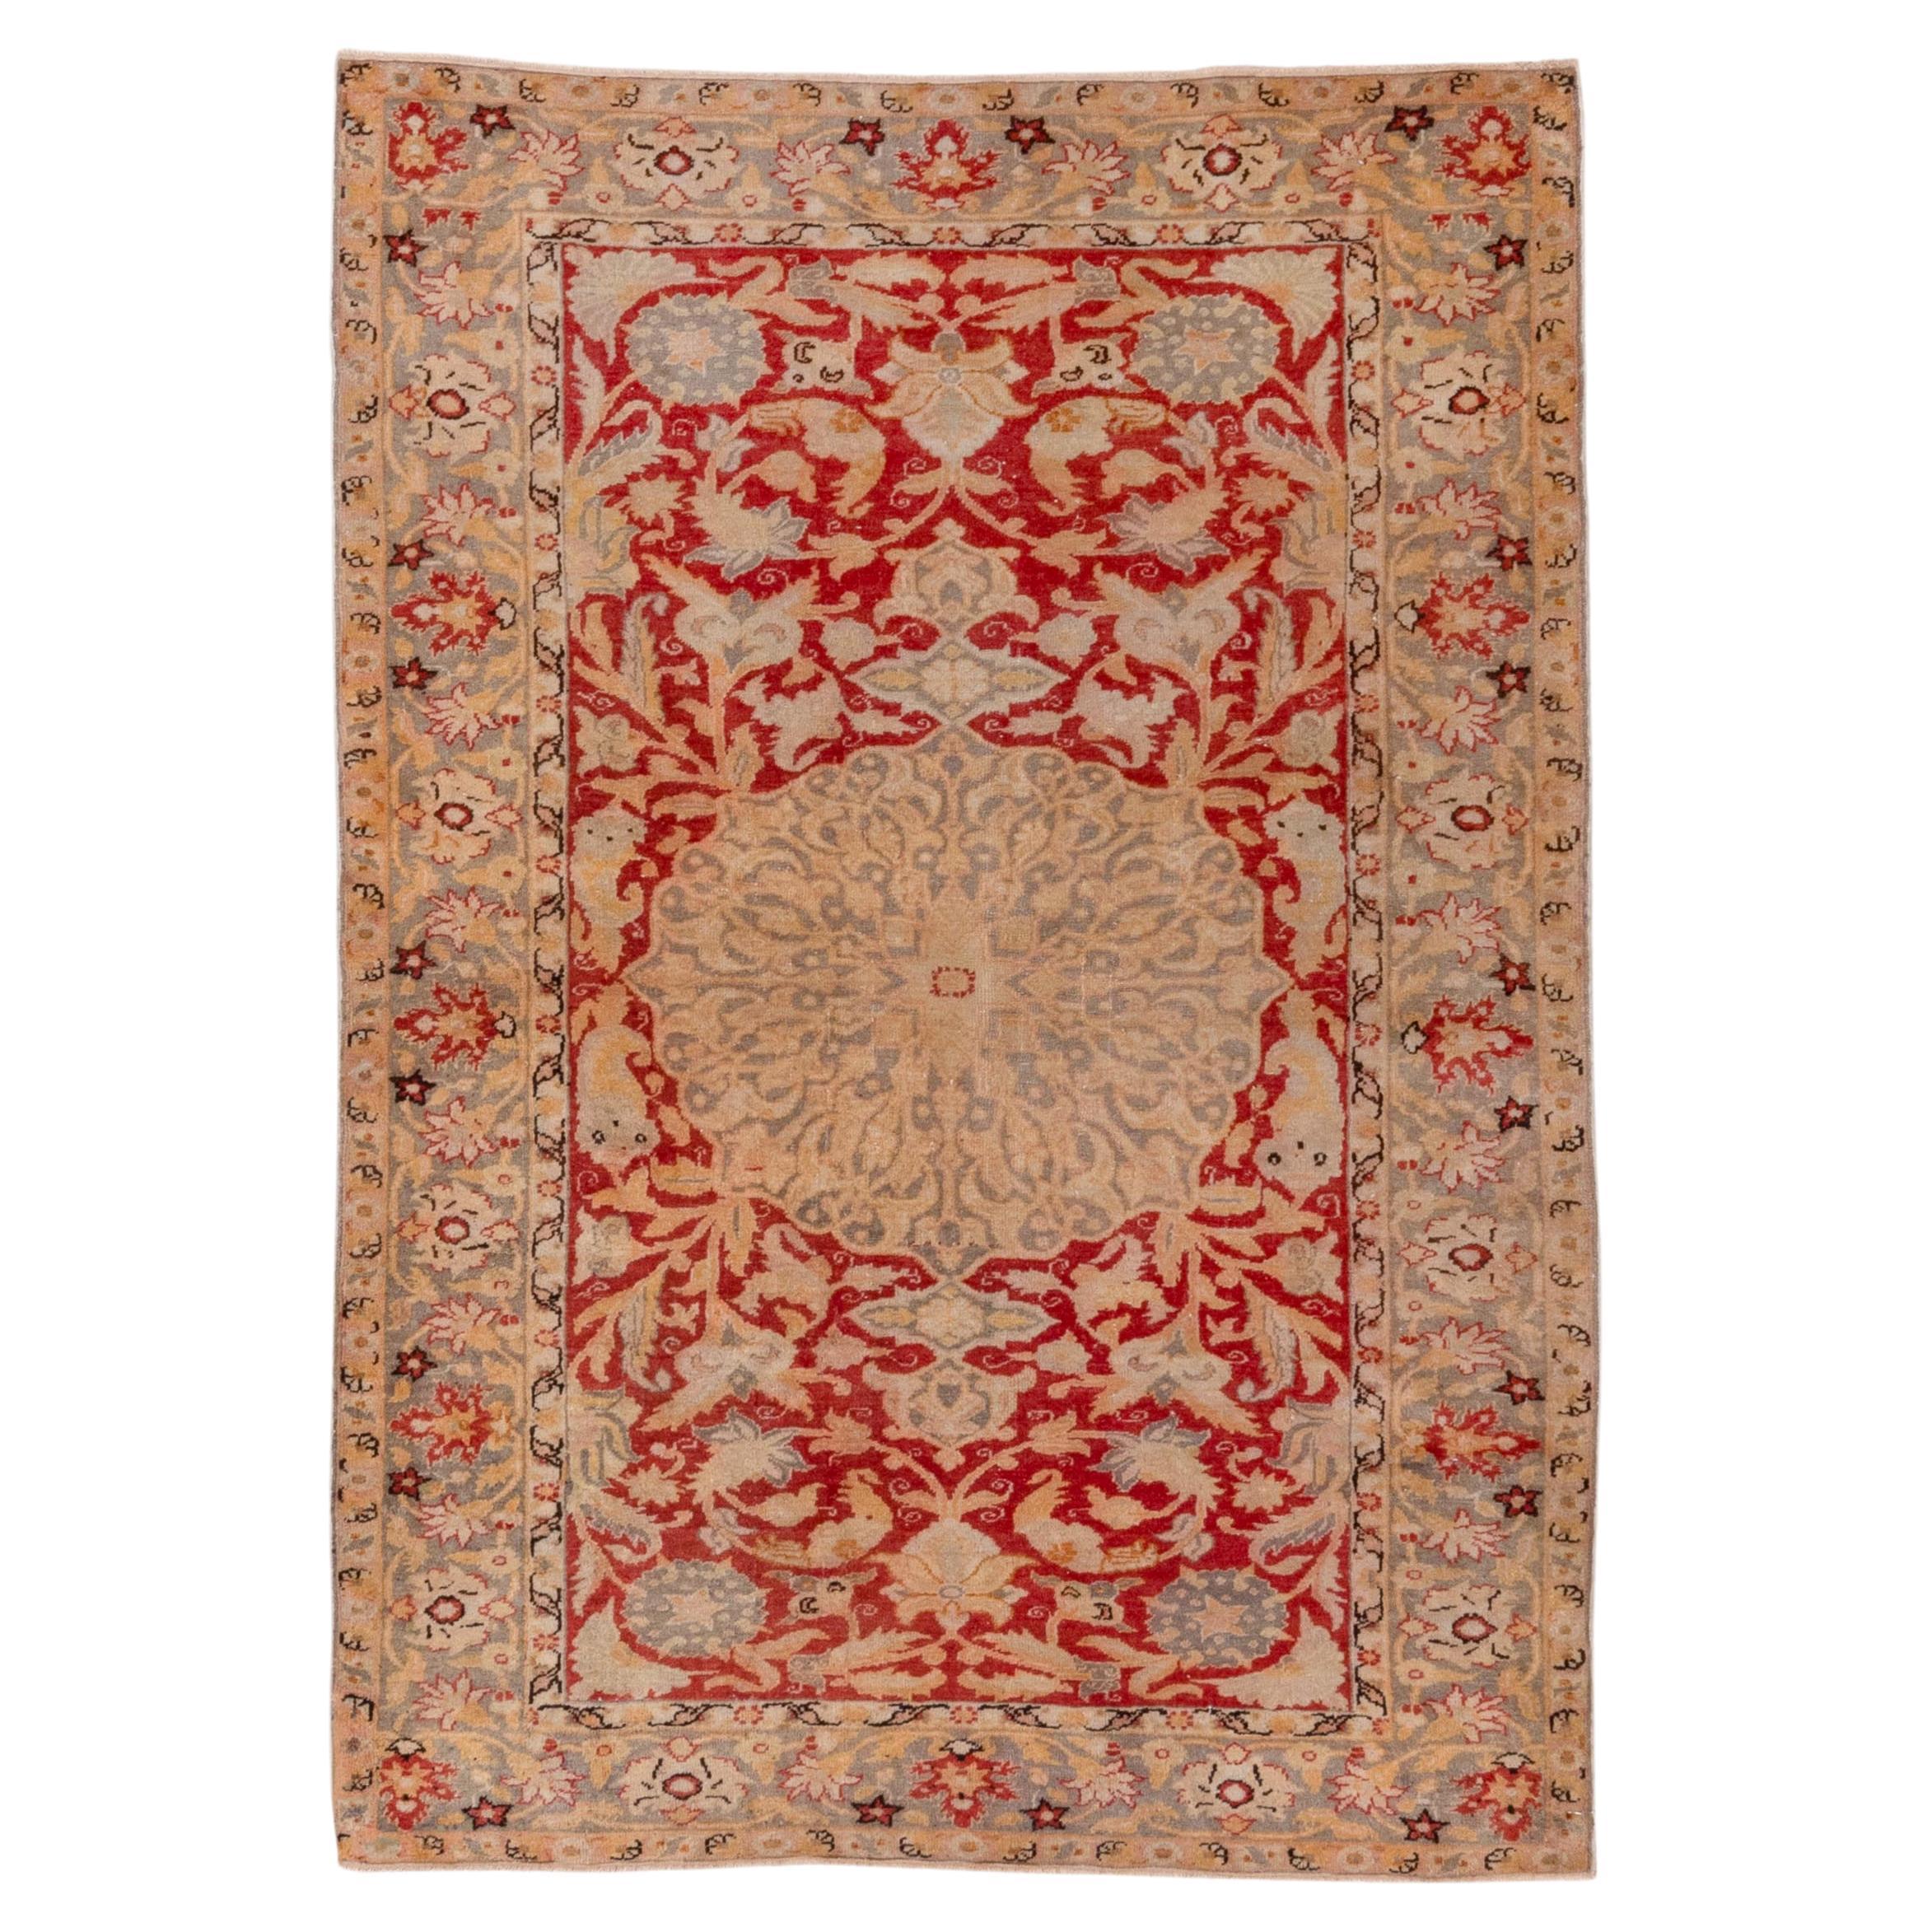 Royal Red and Egyptian Sand Tan, Center Medallion 1930s Antique Kaisary Rug